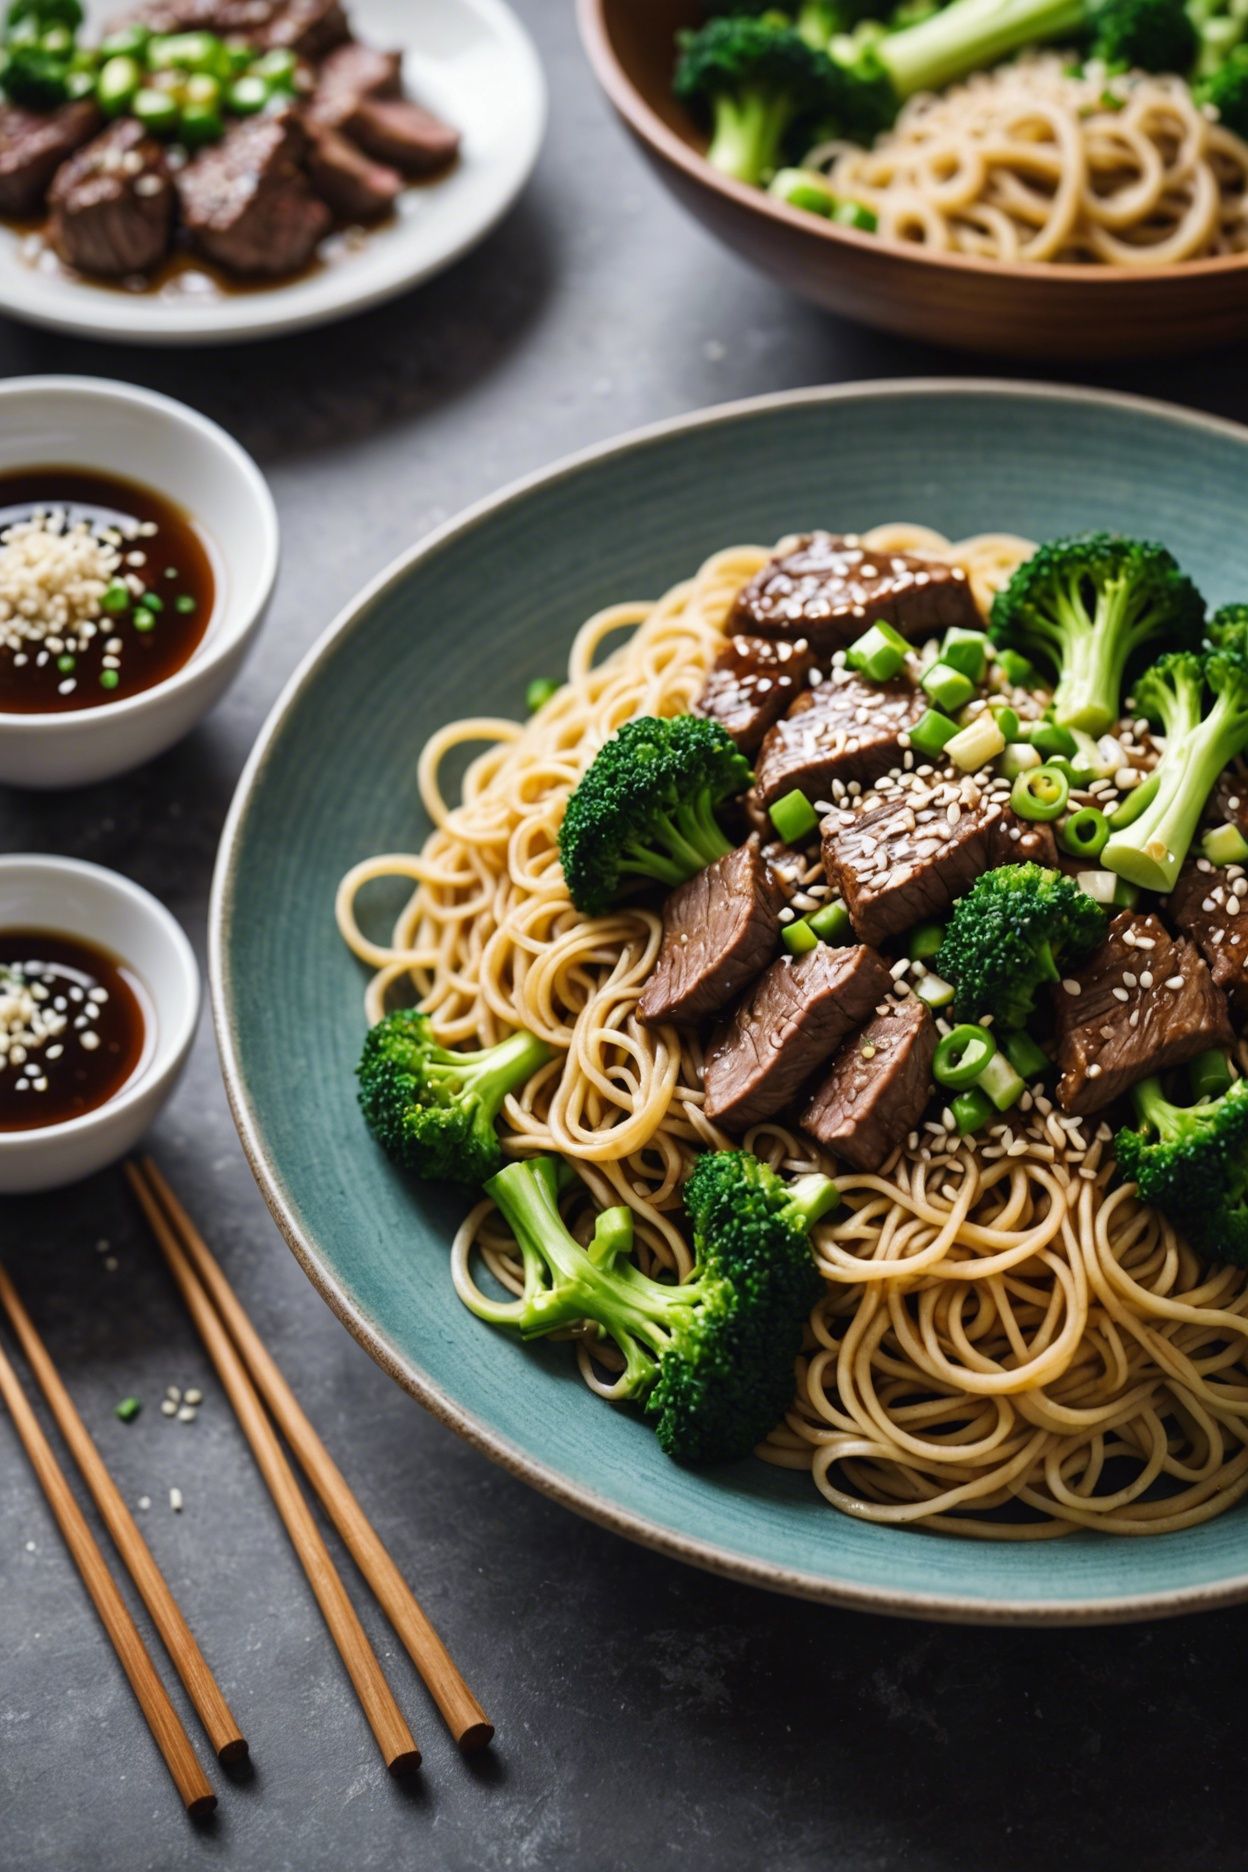 Garlic Noodles With Beef And Broccoli